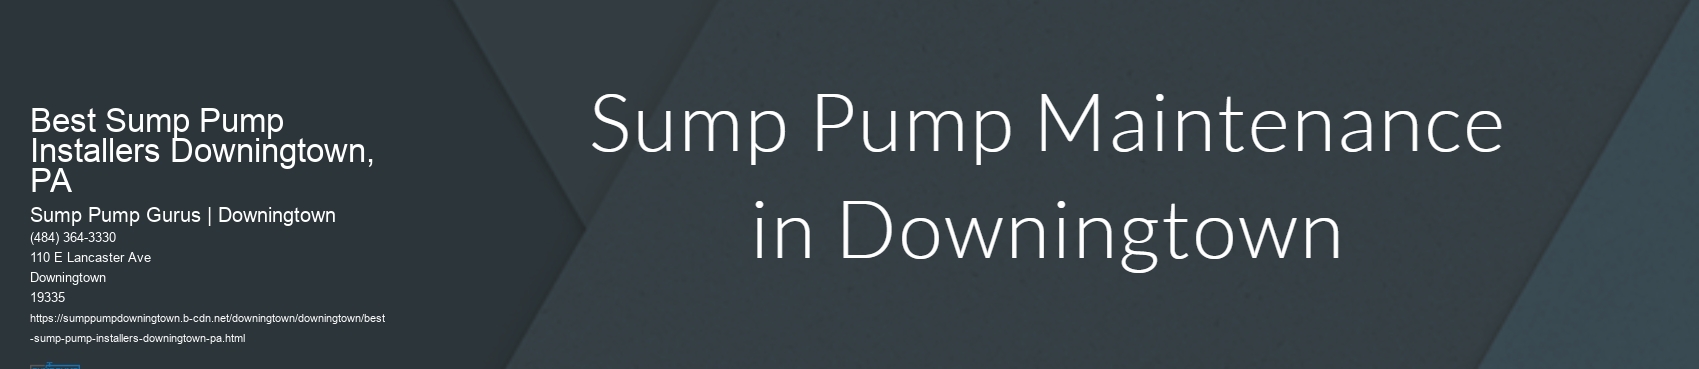 Best Sump Pump Installers Downingtown, PA